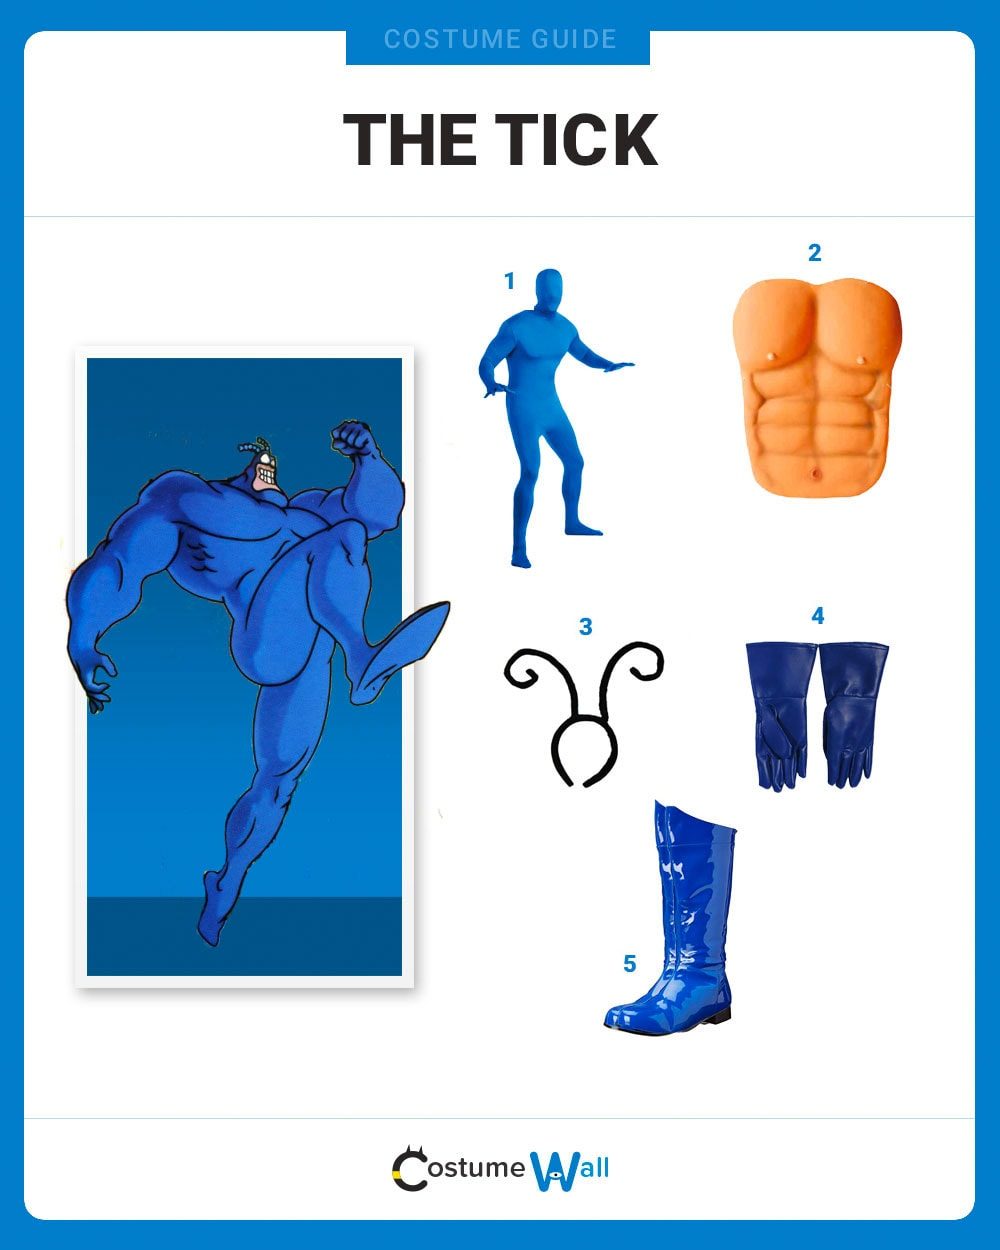 The Tick Costume Guide